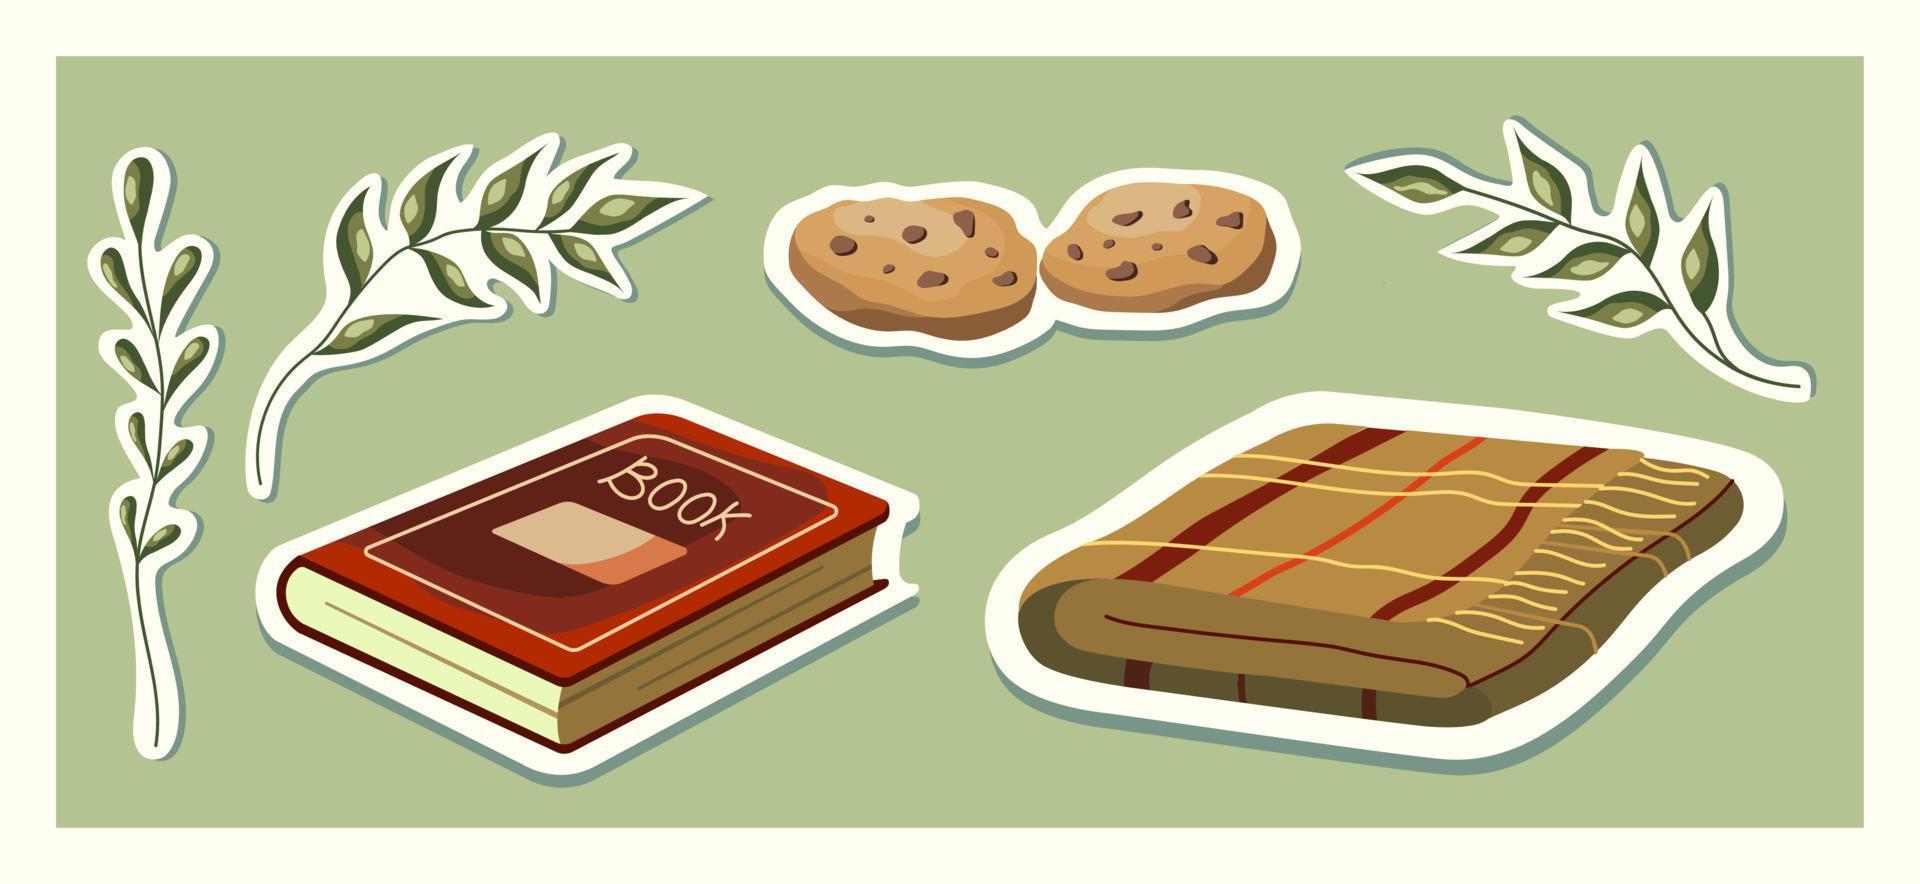 Cozy home set of items on the theme of reading. Book, blanket, and cookies. vector